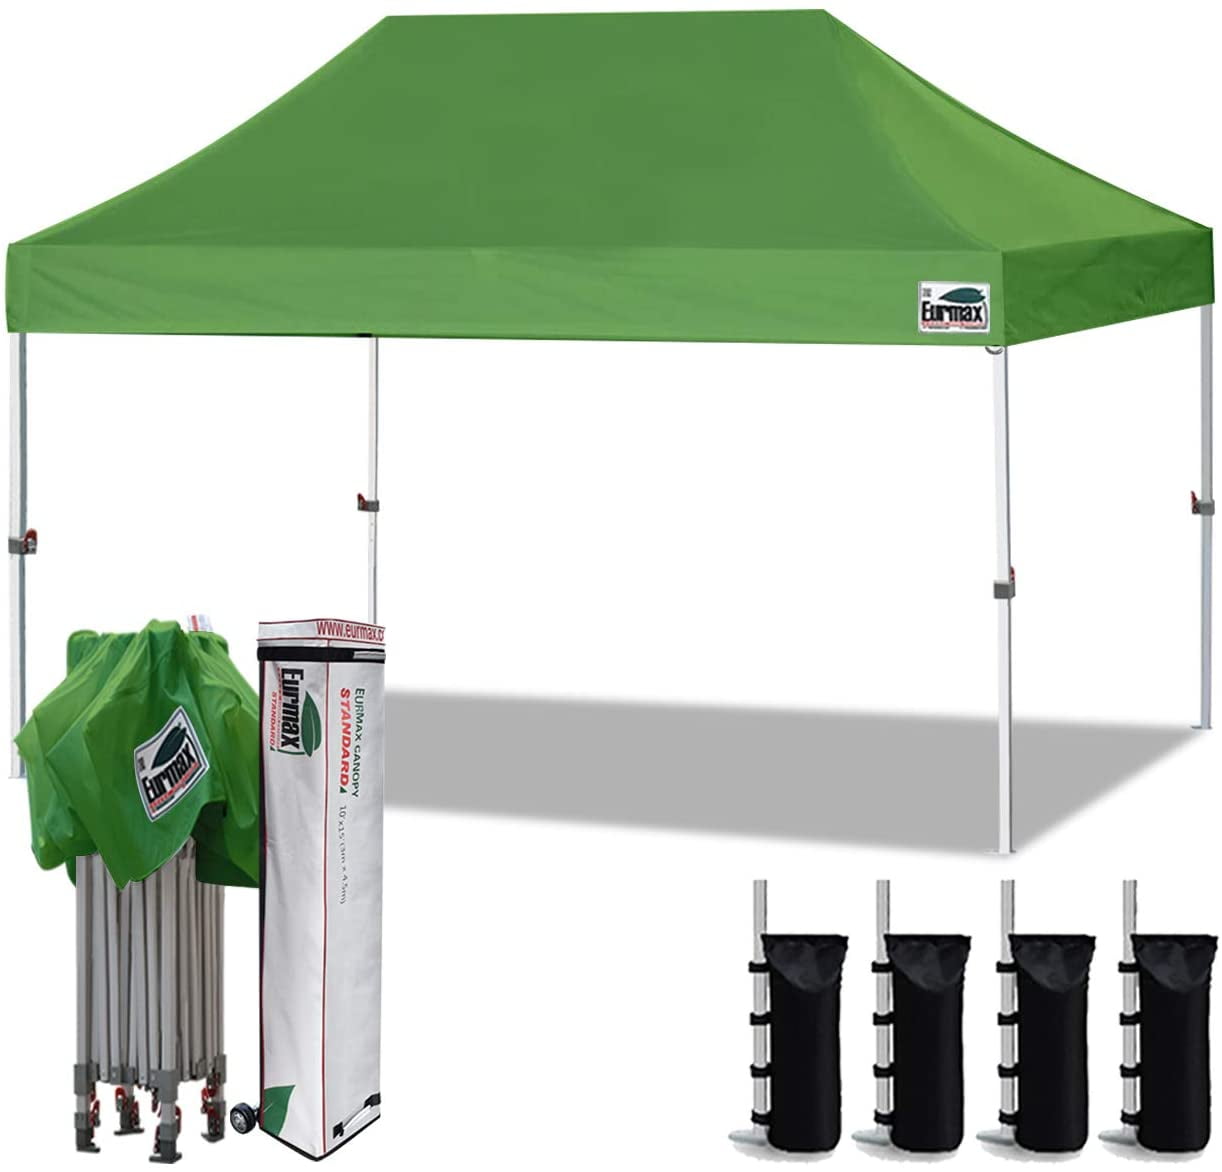 Eurmax 1039x1539 Ez Pop Up Canopy Tent Commercial Instant Canopies With